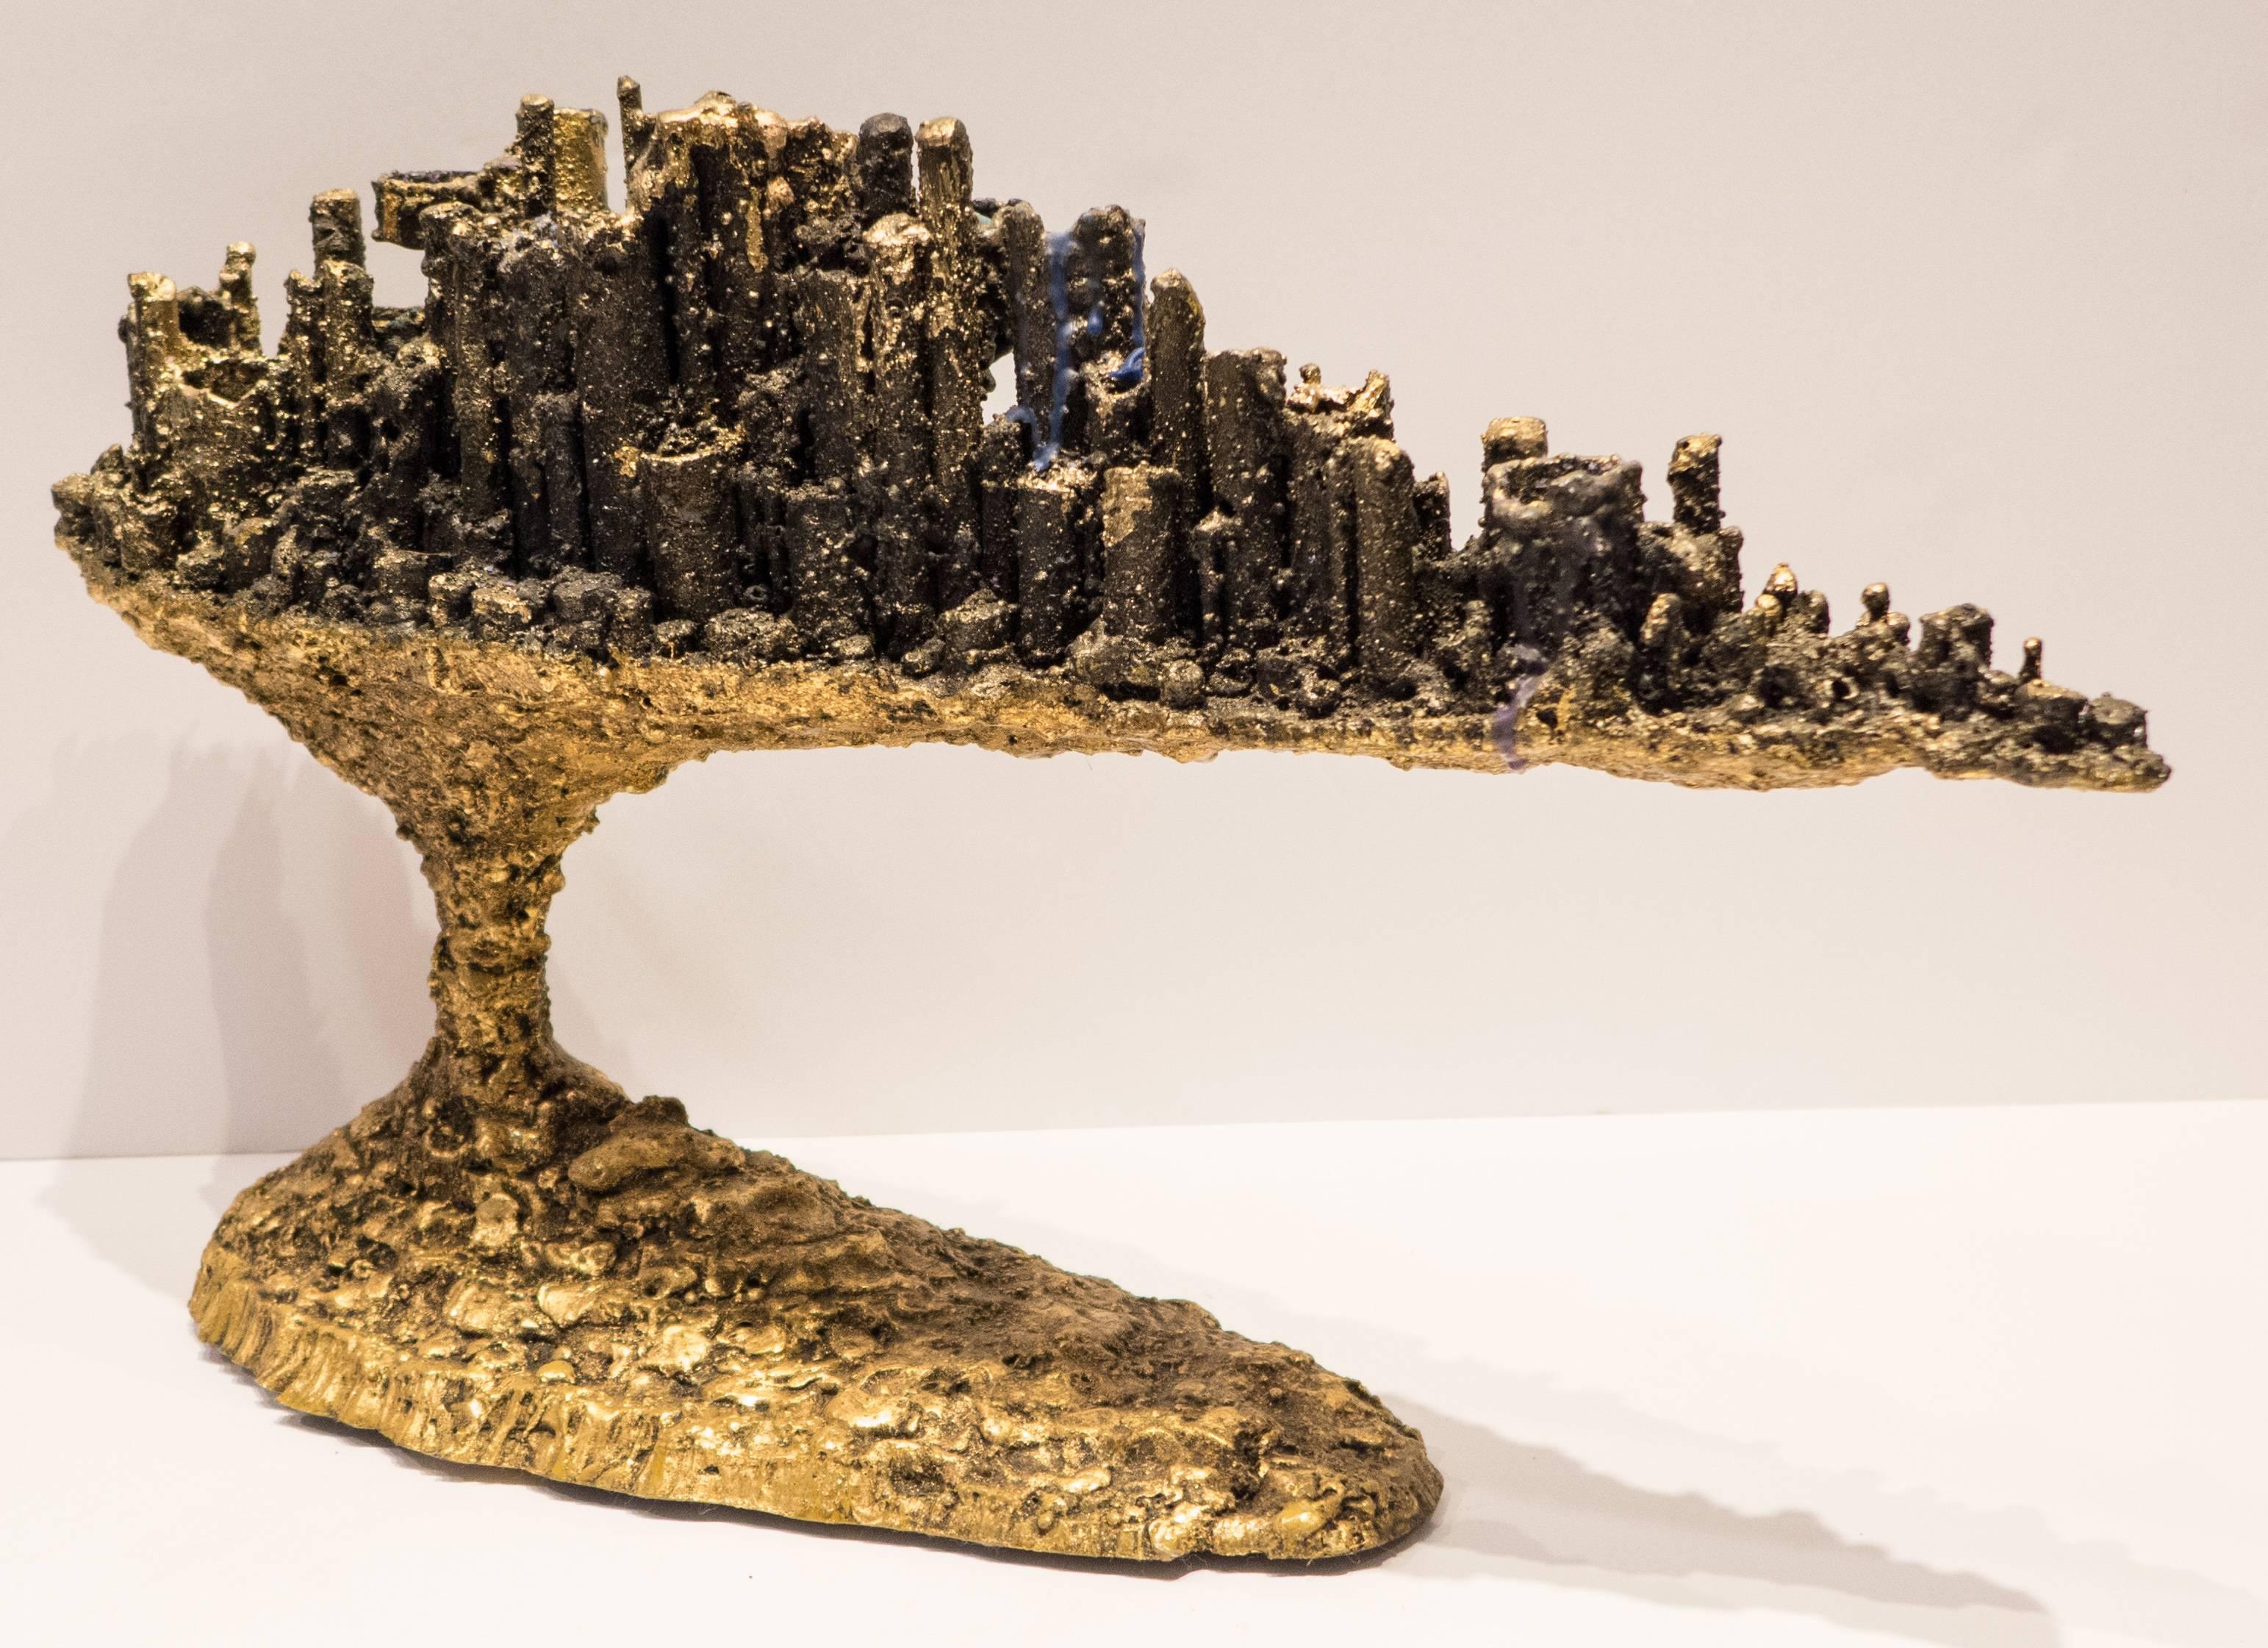 Candelabra of blackened and 24-karat gold gilded steel, with the aspect of an extra-terrestrial or futuristic cityscape. By American artist James Bearden. Bearden's work was featured in a 2020 solo exhibition at the NY Design Center titled 